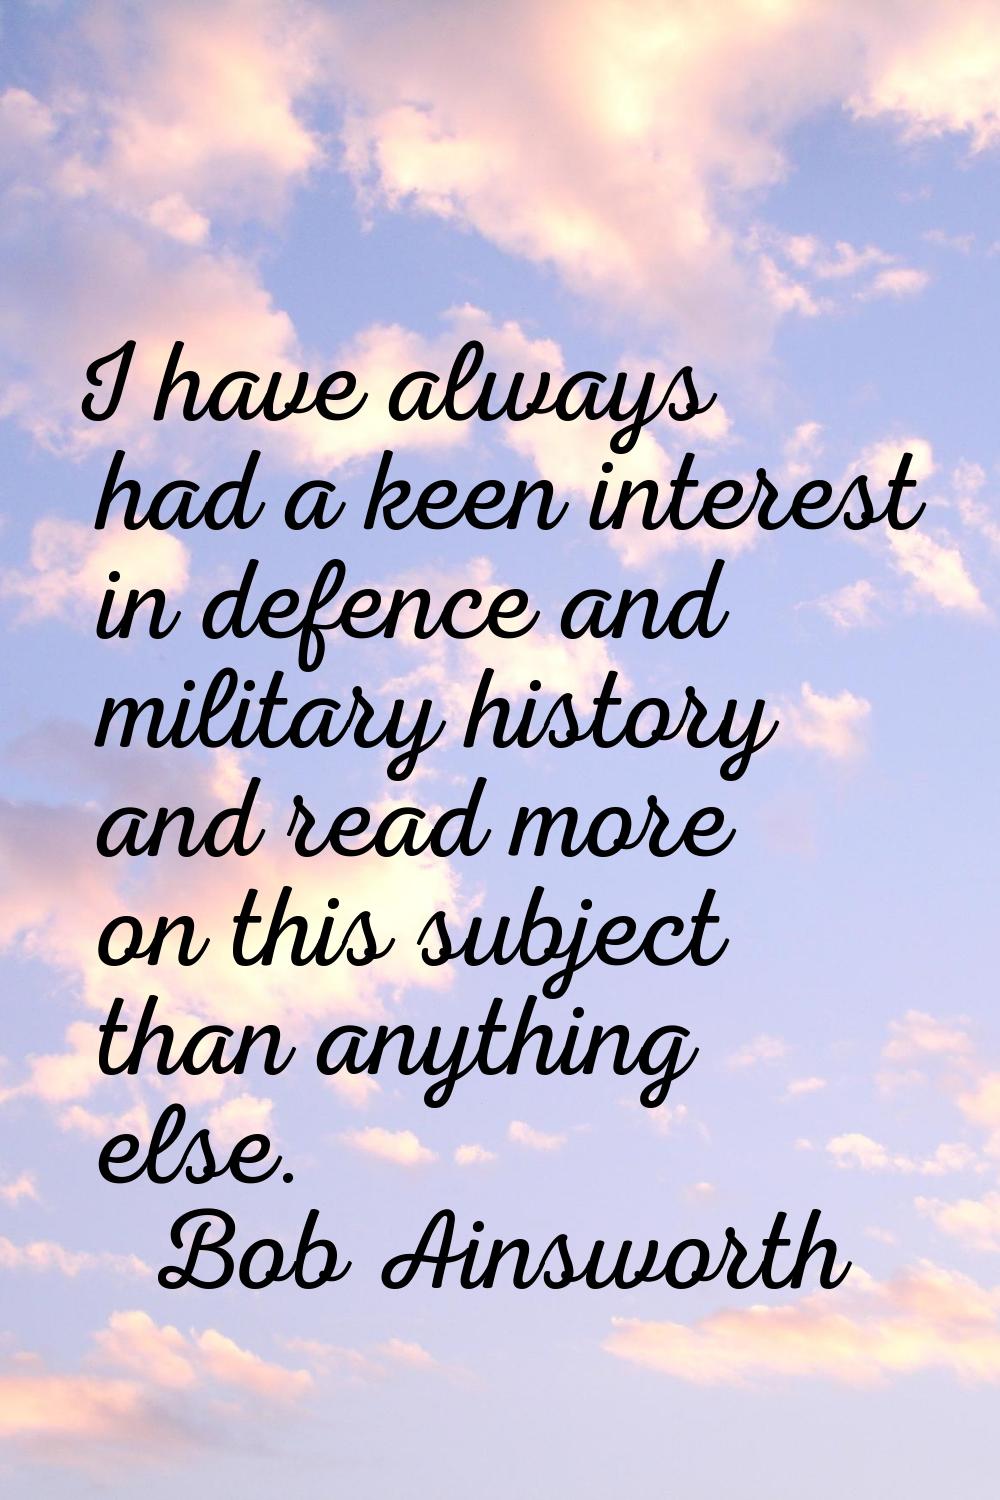 I have always had a keen interest in defence and military history and read more on this subject tha